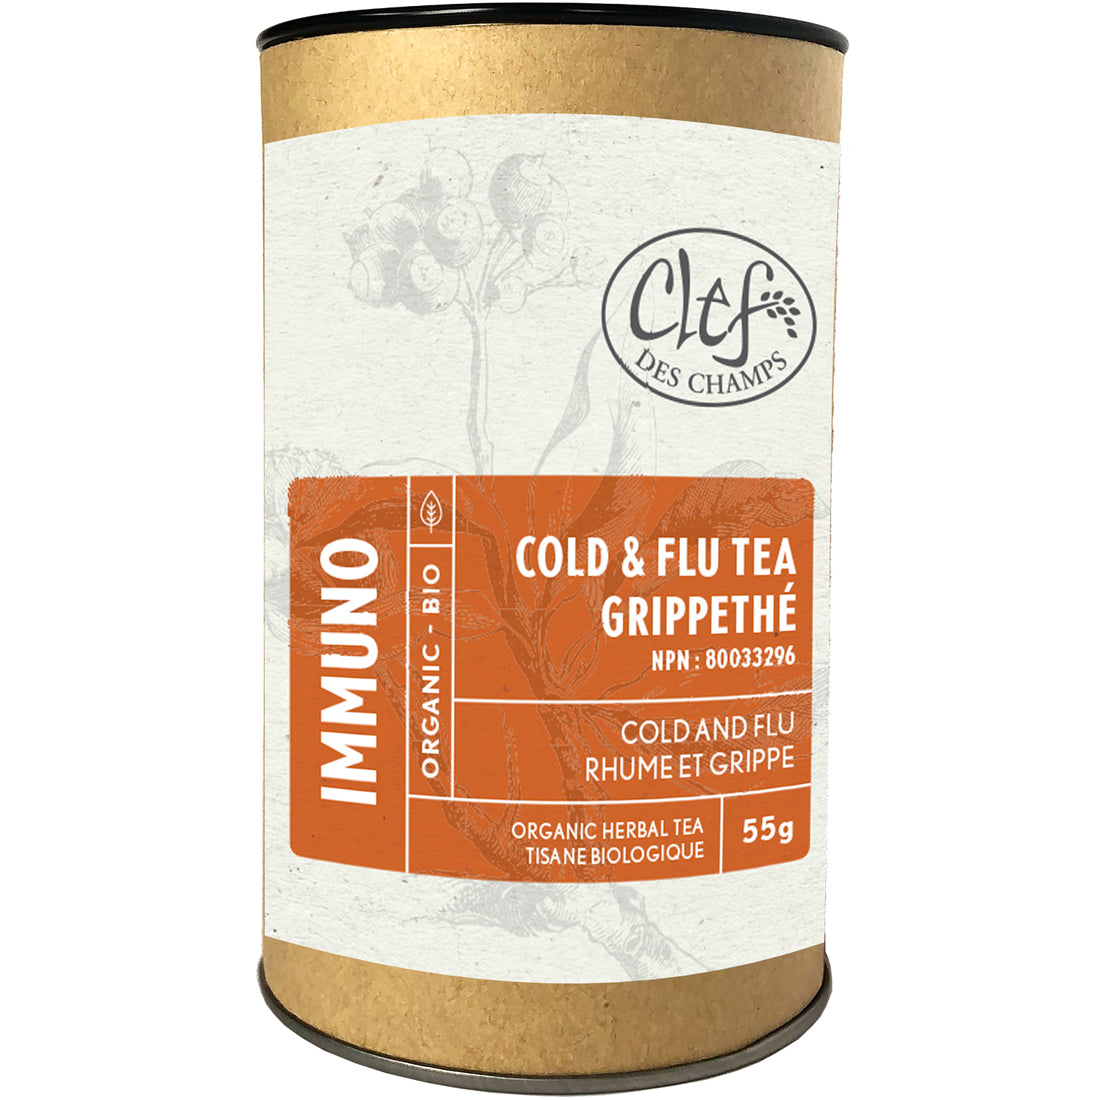 Clef des Champs Cold and Flu Organic Loose Tea, Case of 6 x 55g